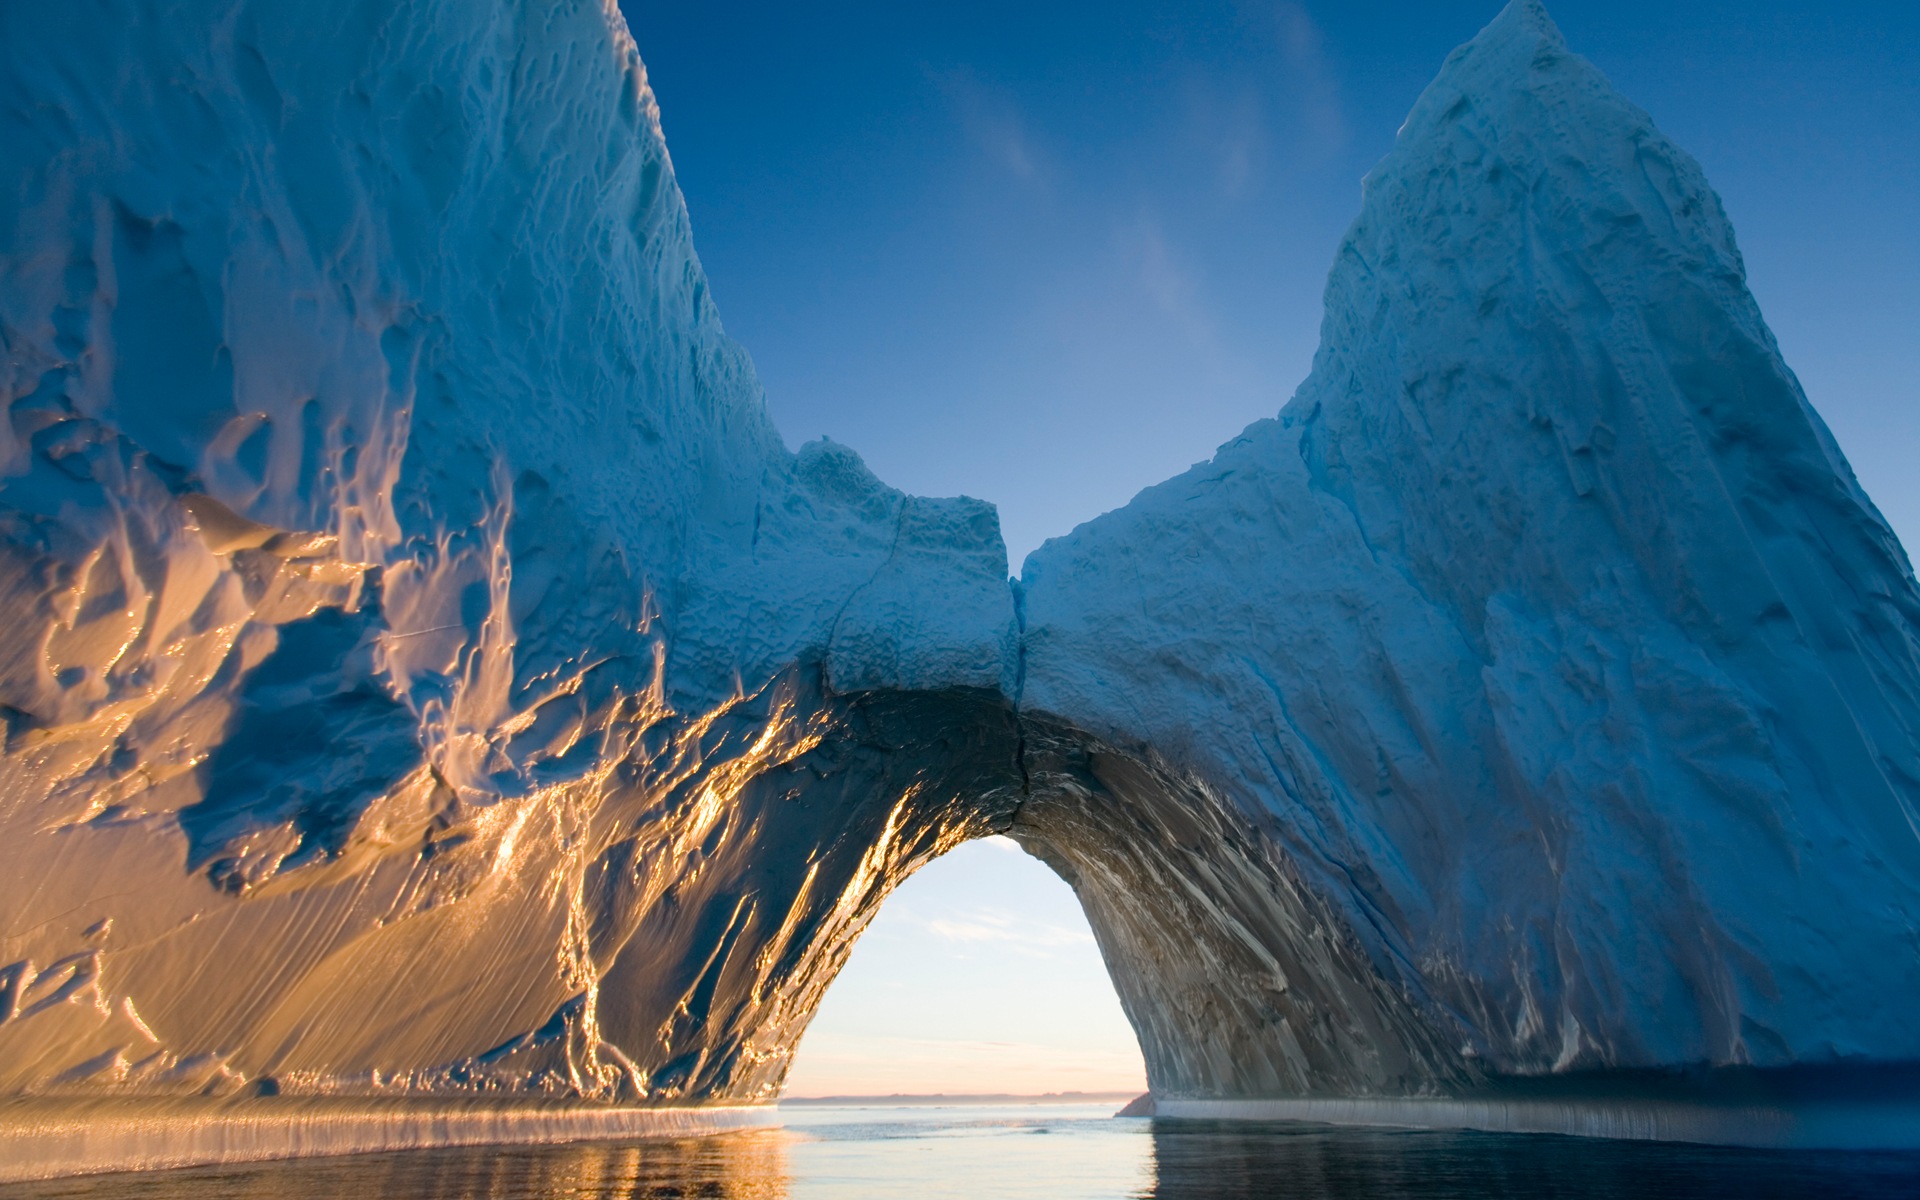 Windows 8 Wallpapers: Arctic, the nature ecological landscape, arctic animals #3 - 1920x1200